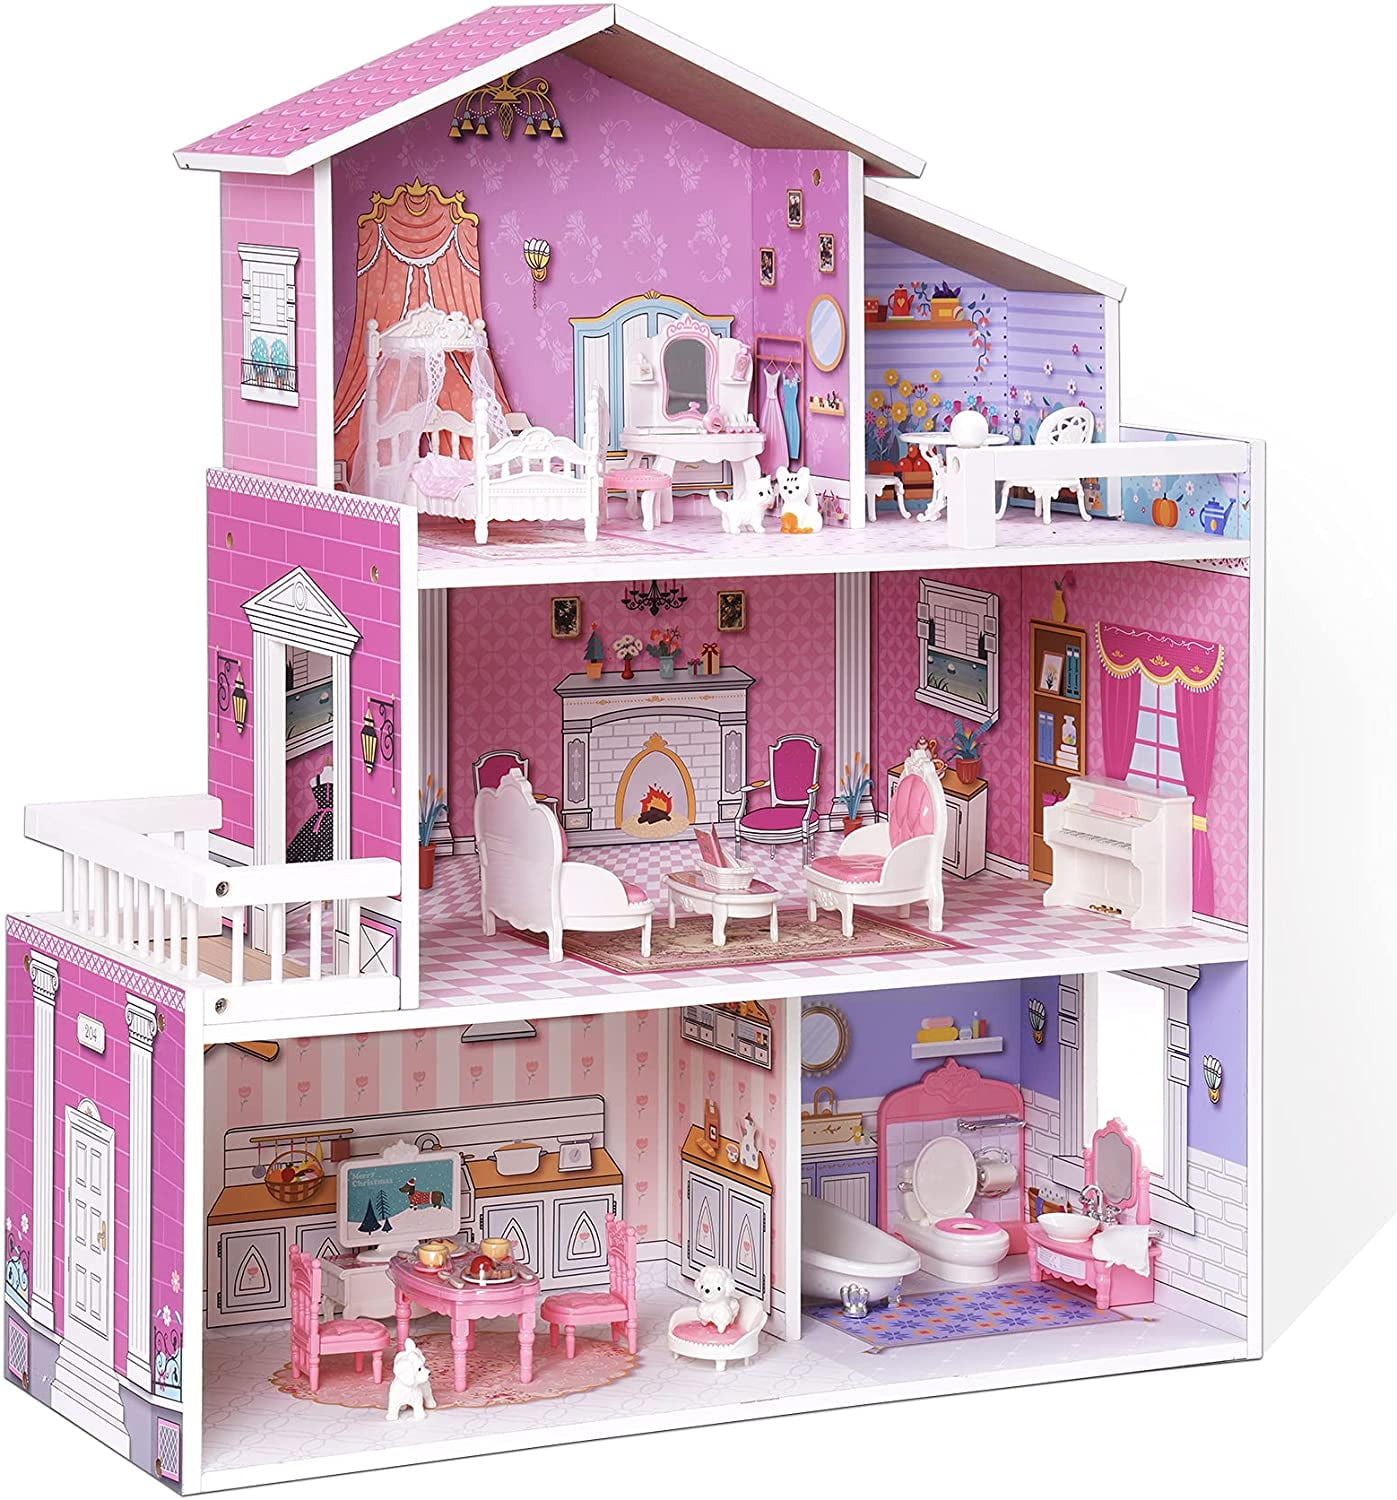 ROBUD Wooden Dollhouse for Kids with 24pcs Furniture Preschool ...